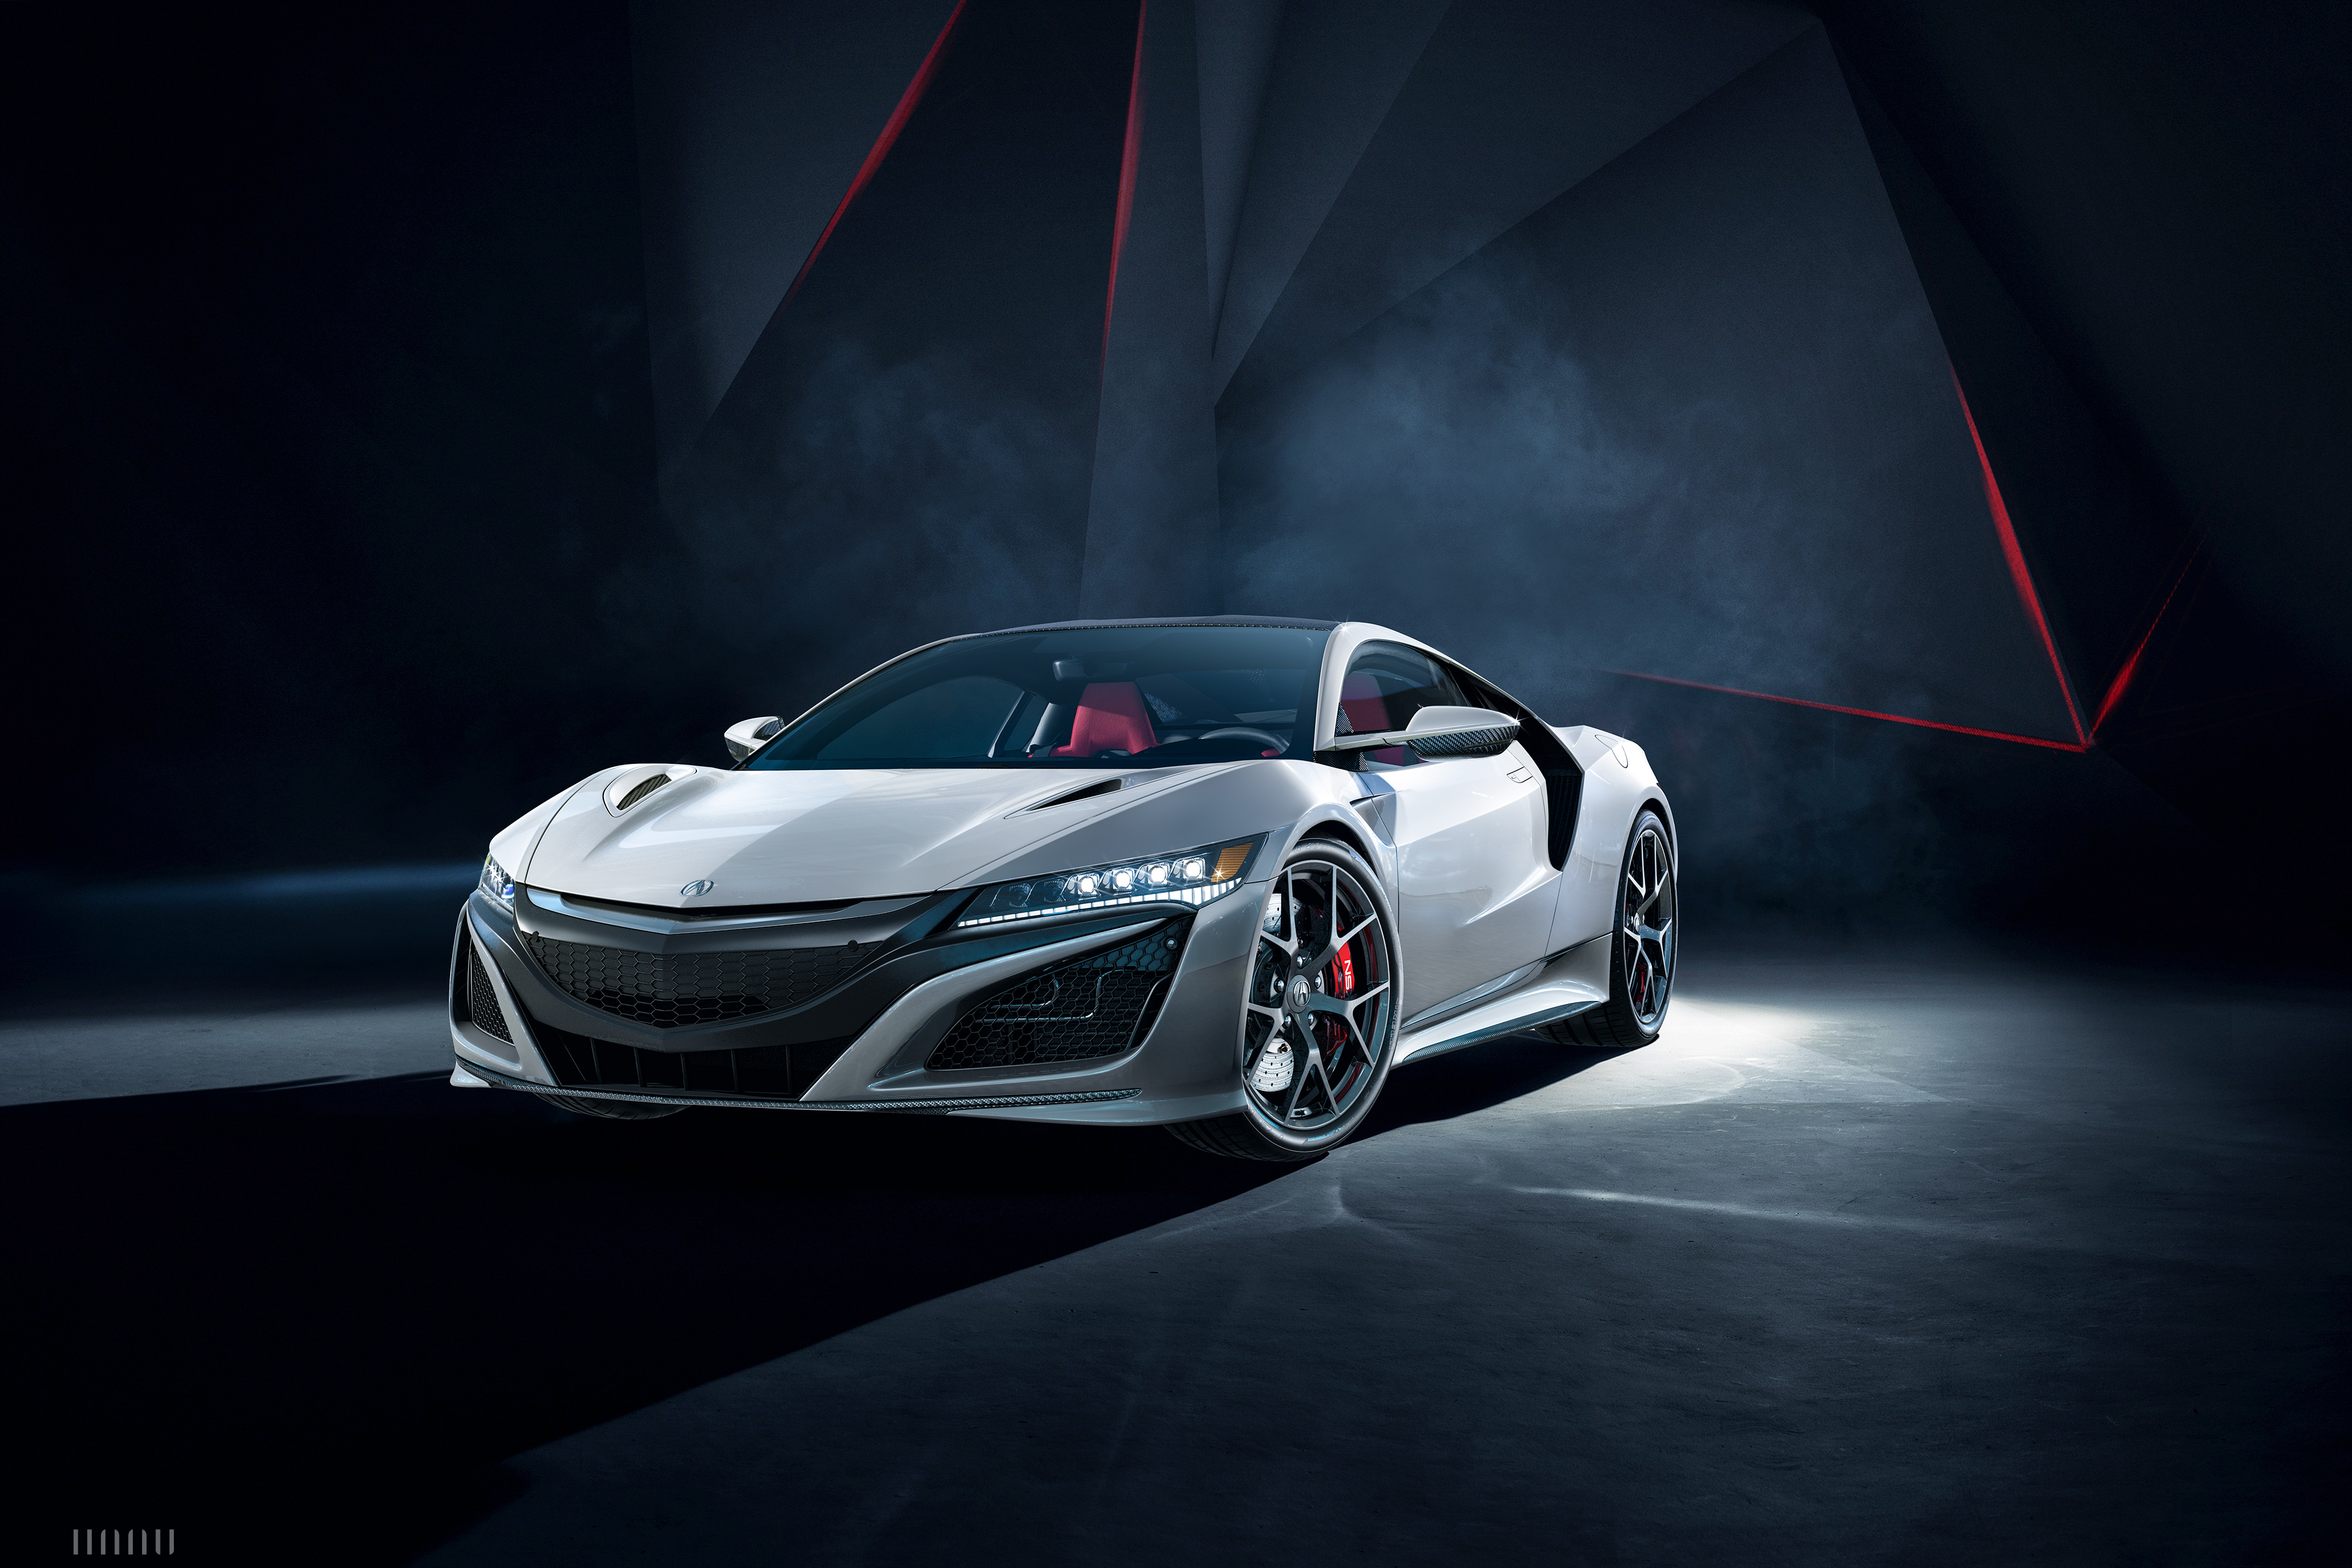 1440x2960 4k Acura Nsx Samsung Galaxy Note 9 8 S9 S8 S8 Qhd Hd 4k Wallpapers Images Backgrounds Photos And Pictures